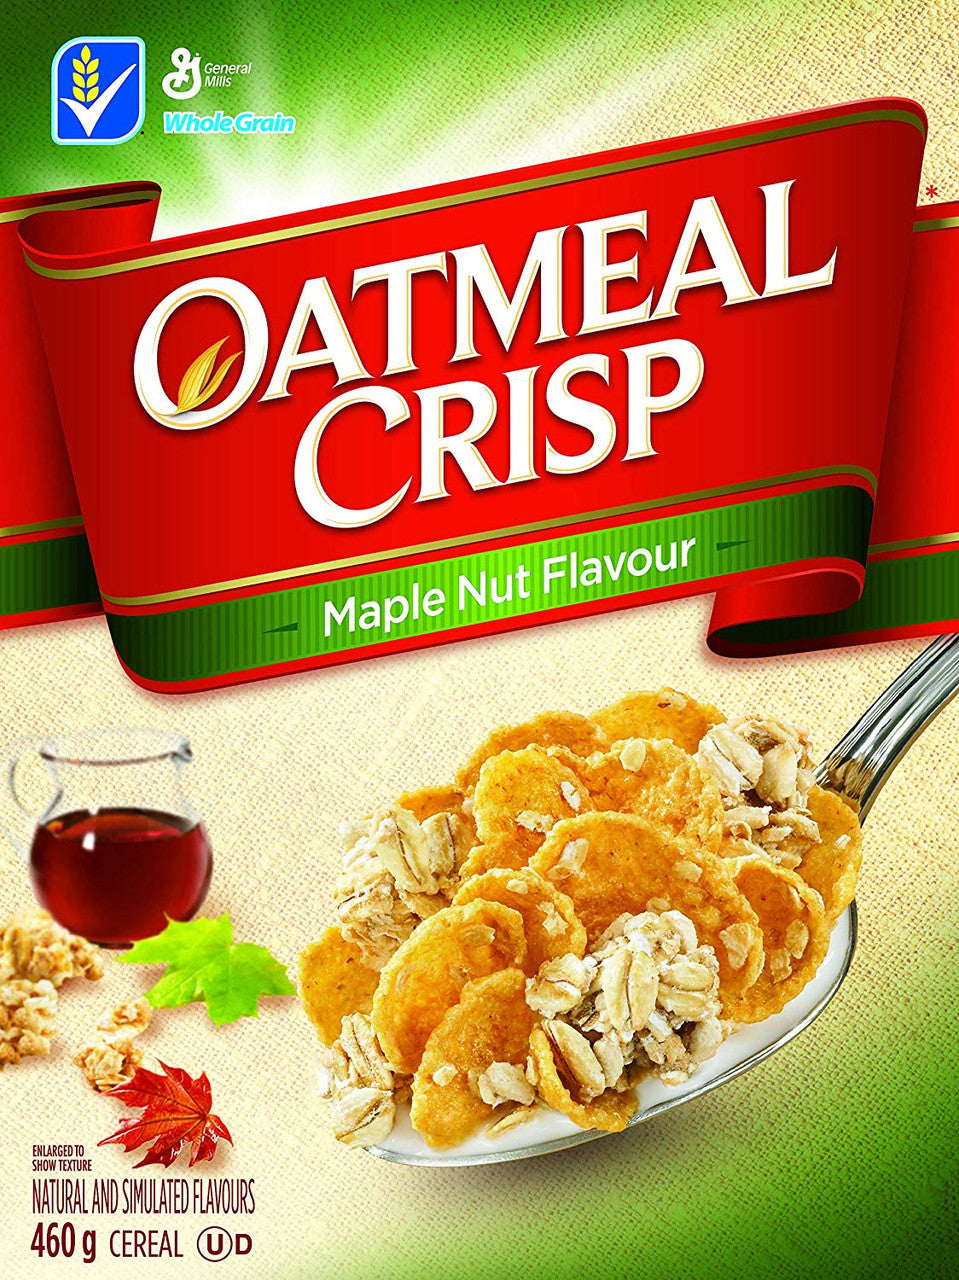 General Mills Oatmeal Crisp Maple Nut Flavour Cereal, 460g/16oz (12pk), (Imported from Canada)